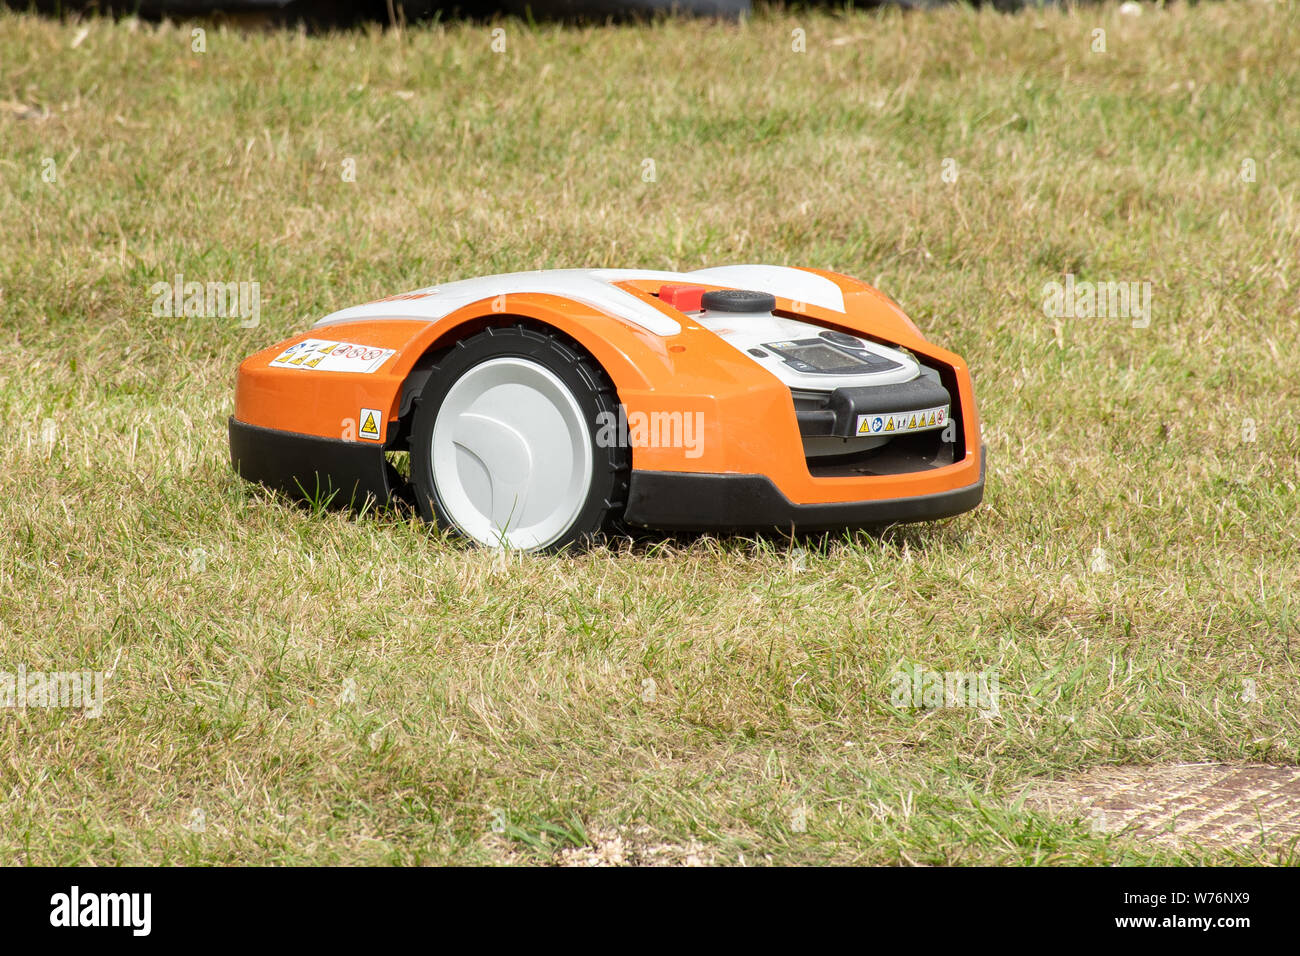 Robotic lawn mower by Stihl, called an iMow Stock Photo